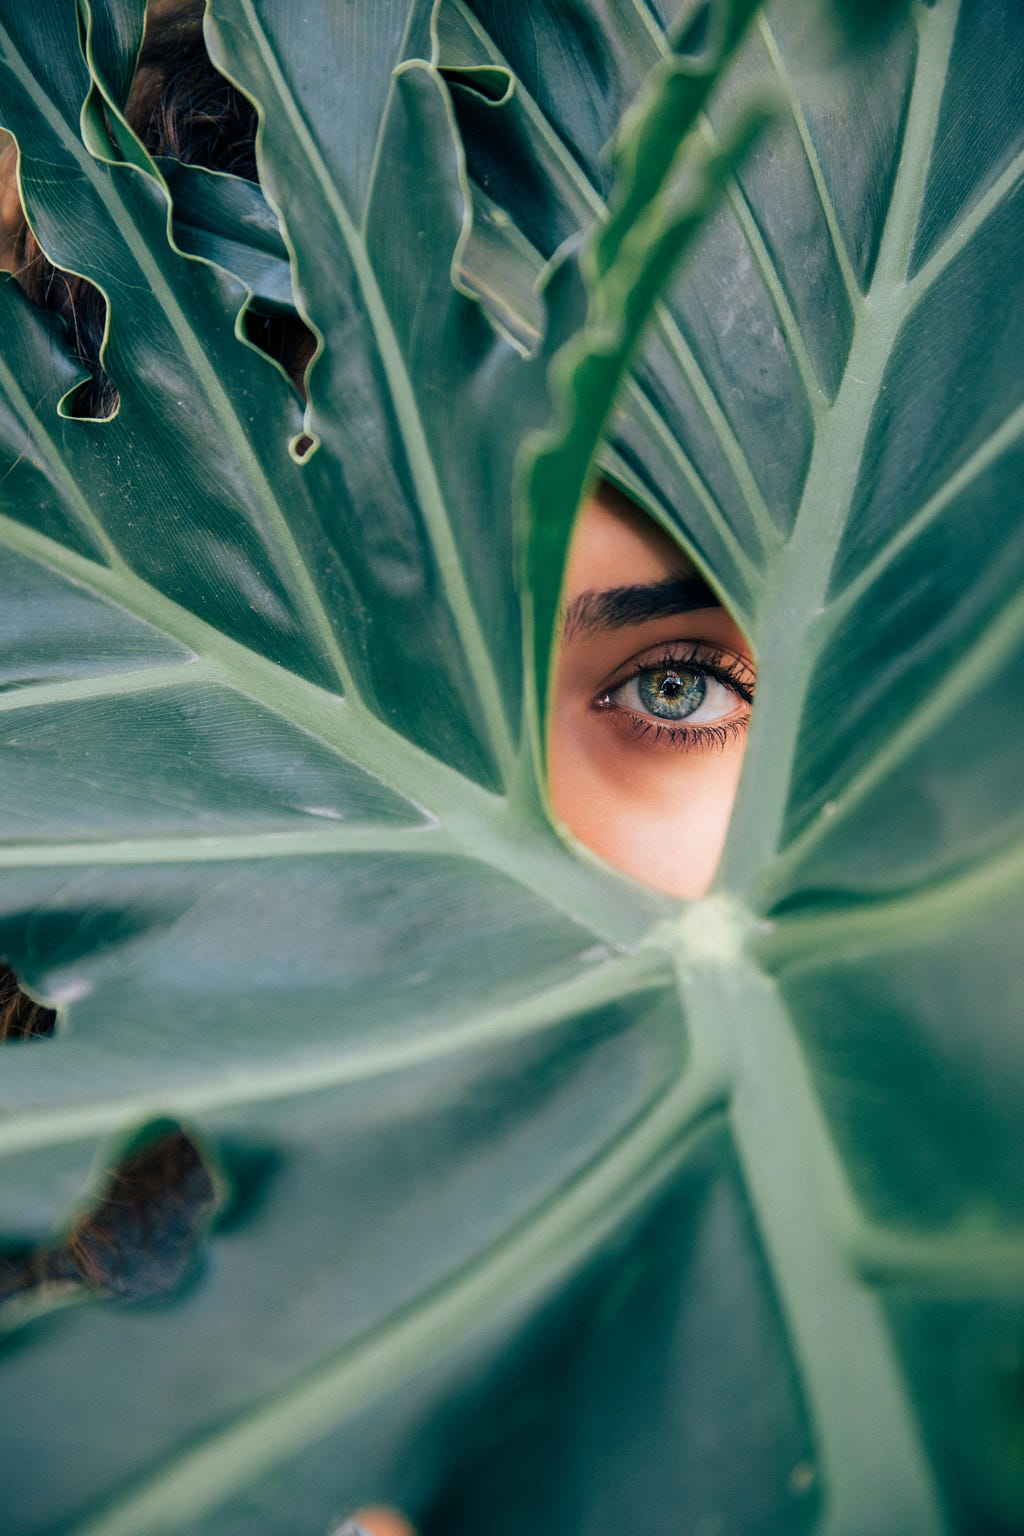 A beautiful human eye peers out of an opening between leaves.